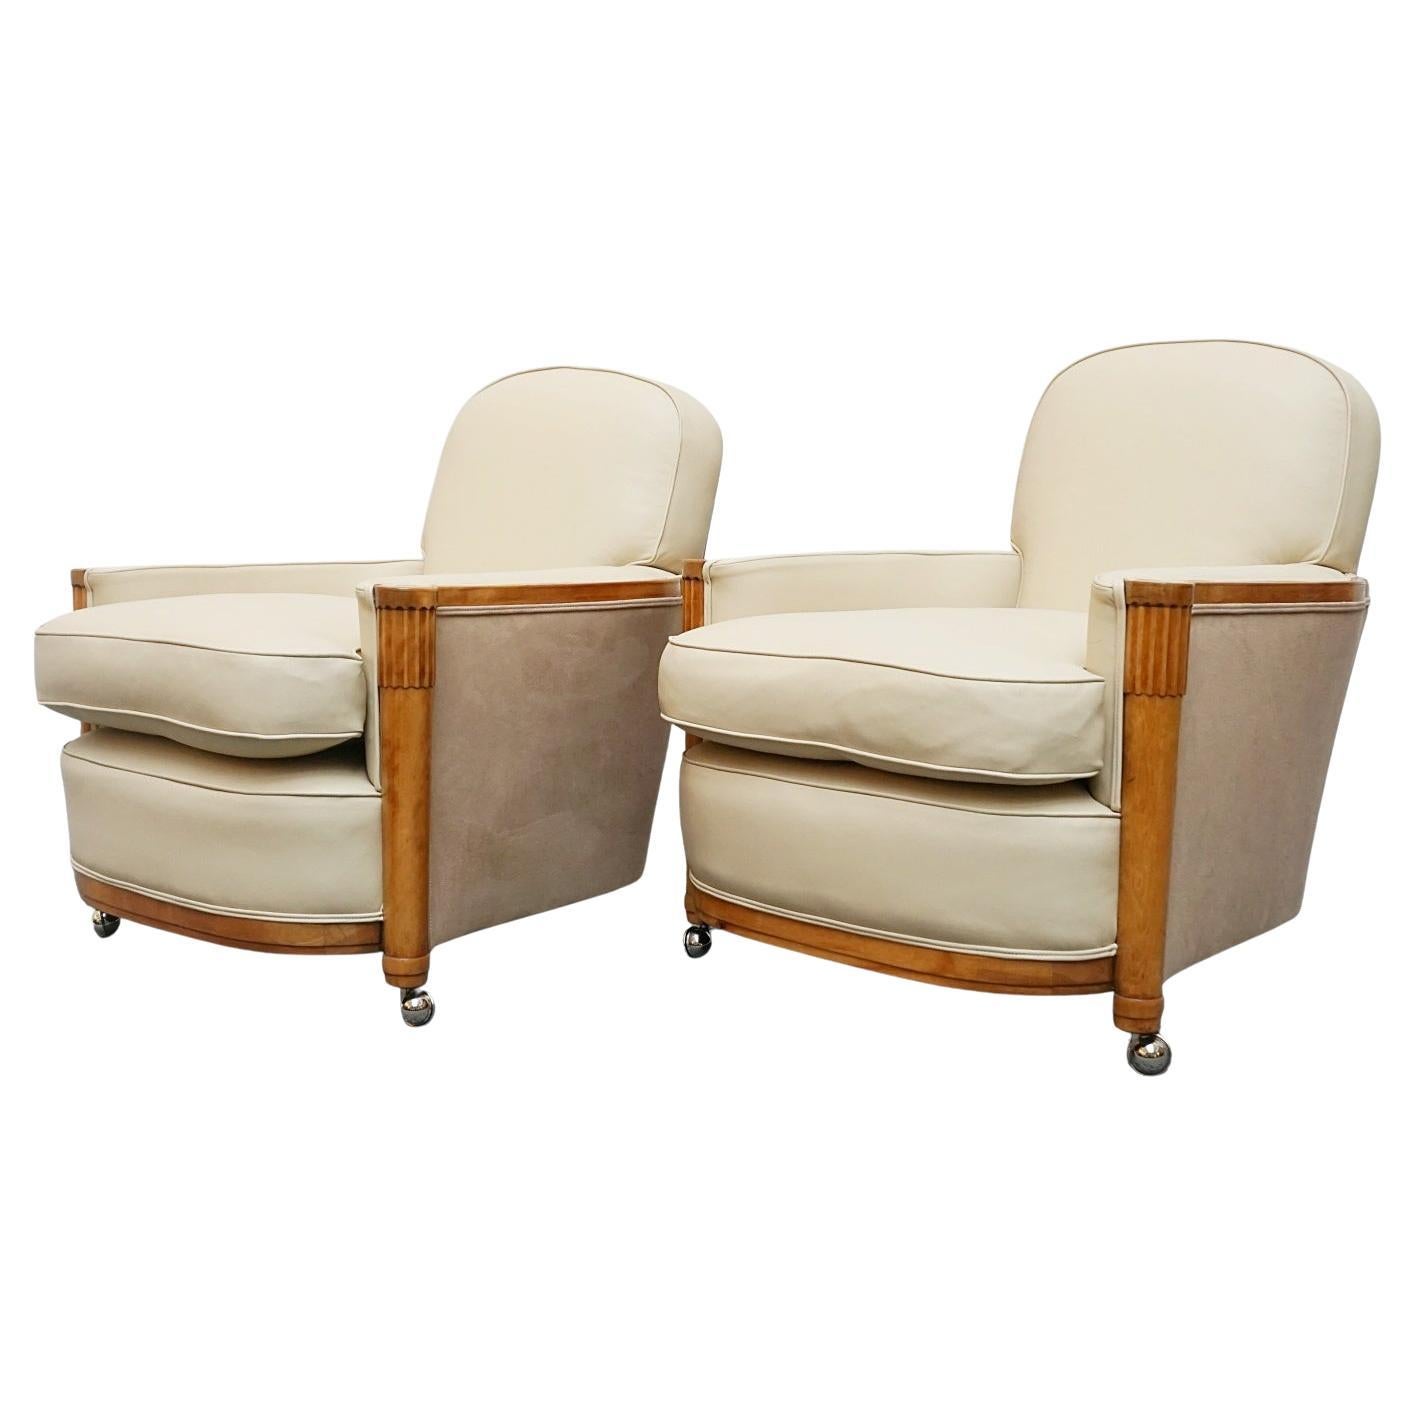 Pair of Art Deco Lounge Chairs by Maurice Adams Cream Leather and Satinwood 